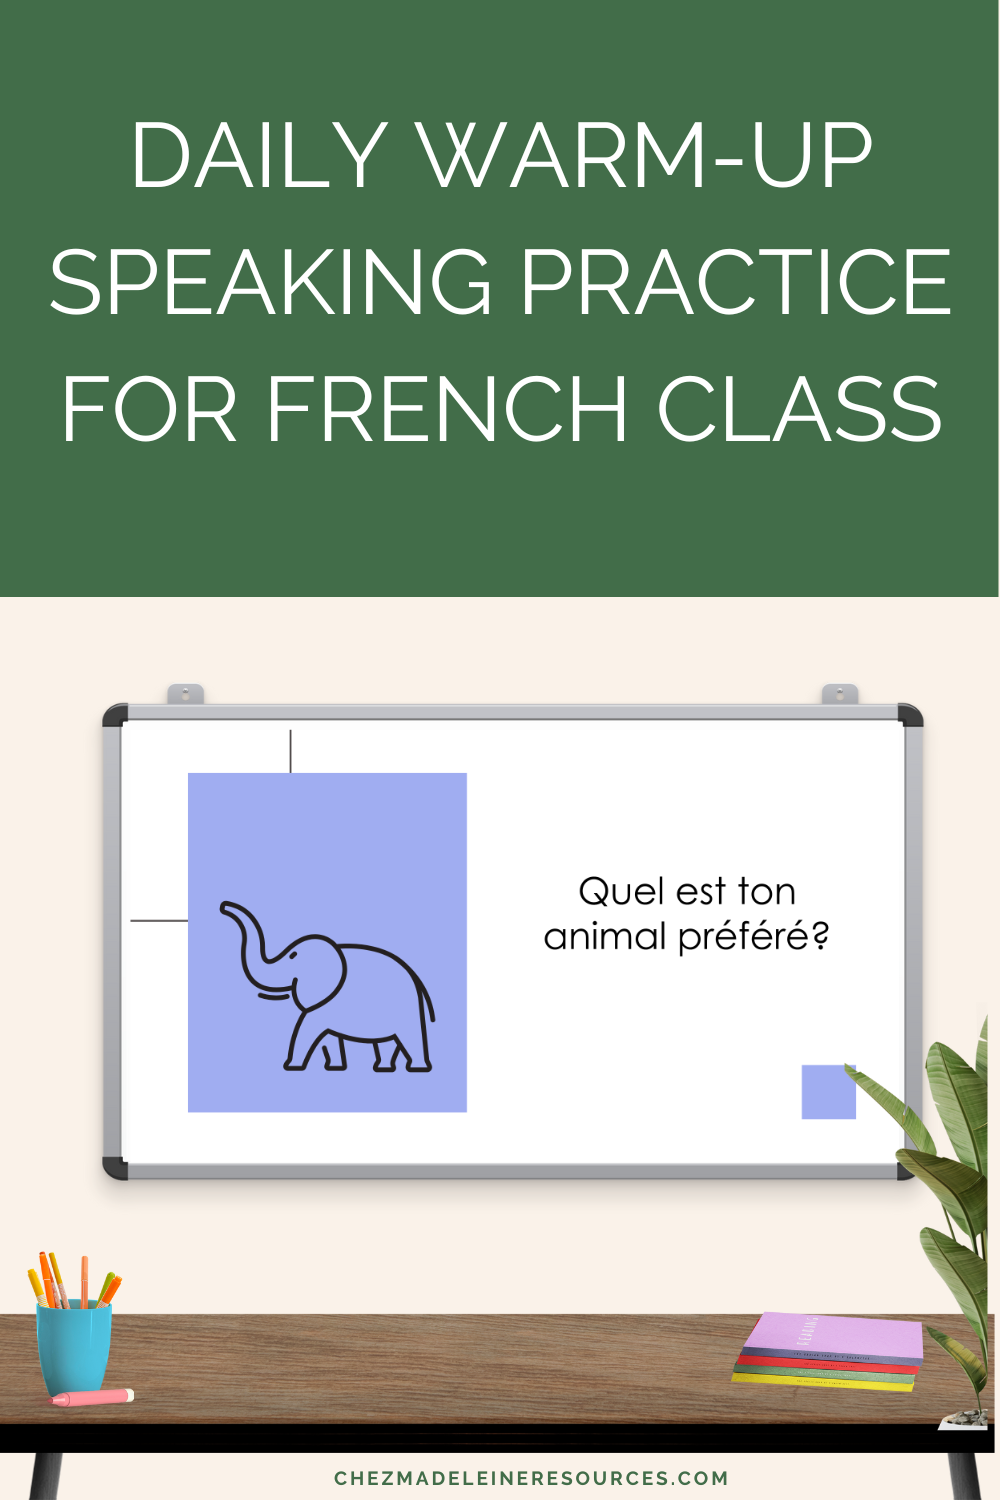 The image shows a classroom set-up with a desk and a whiteboard. Projected onto the whiteboard is a slide with reads "quel est ton animal préféré" with a picture of a cartoon elephant next to it. This is an example of the Question du Jour activity. Above the image the text reads "Daily warm-up speaking practice for French class."